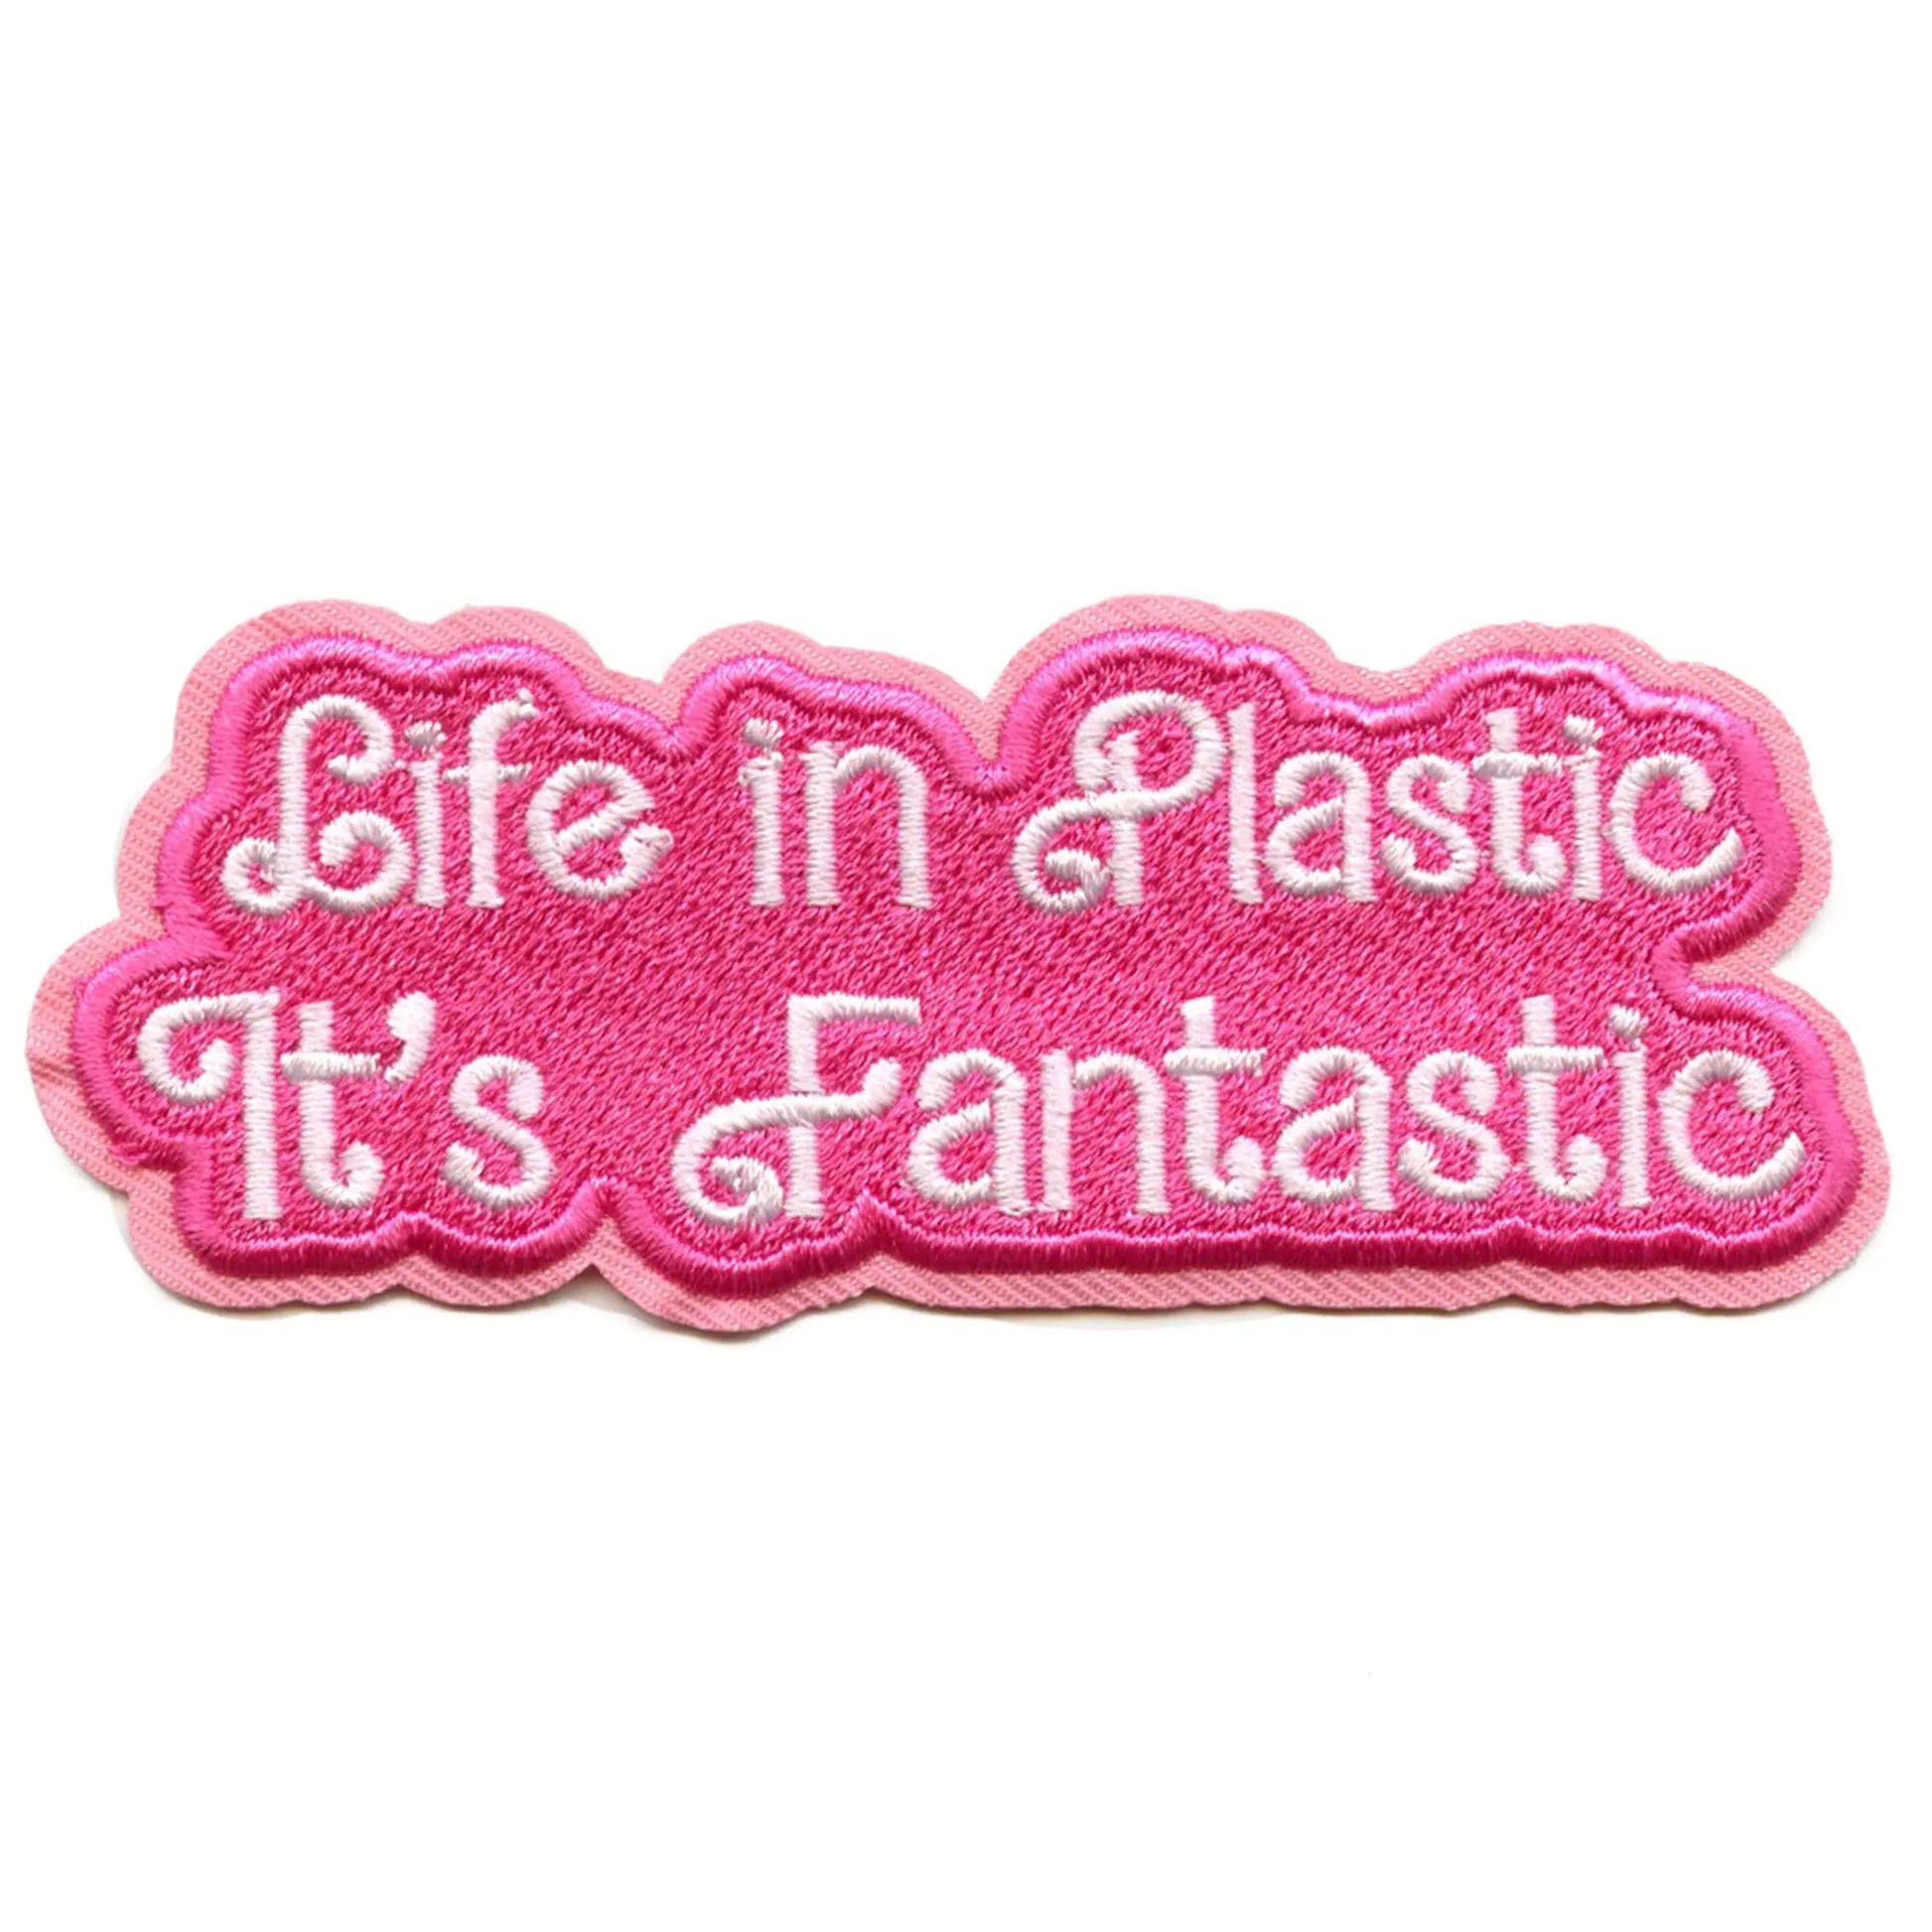 Barbie Classic Phrase Patch Life In Plastic It's Fantastic Embroidered Iron On